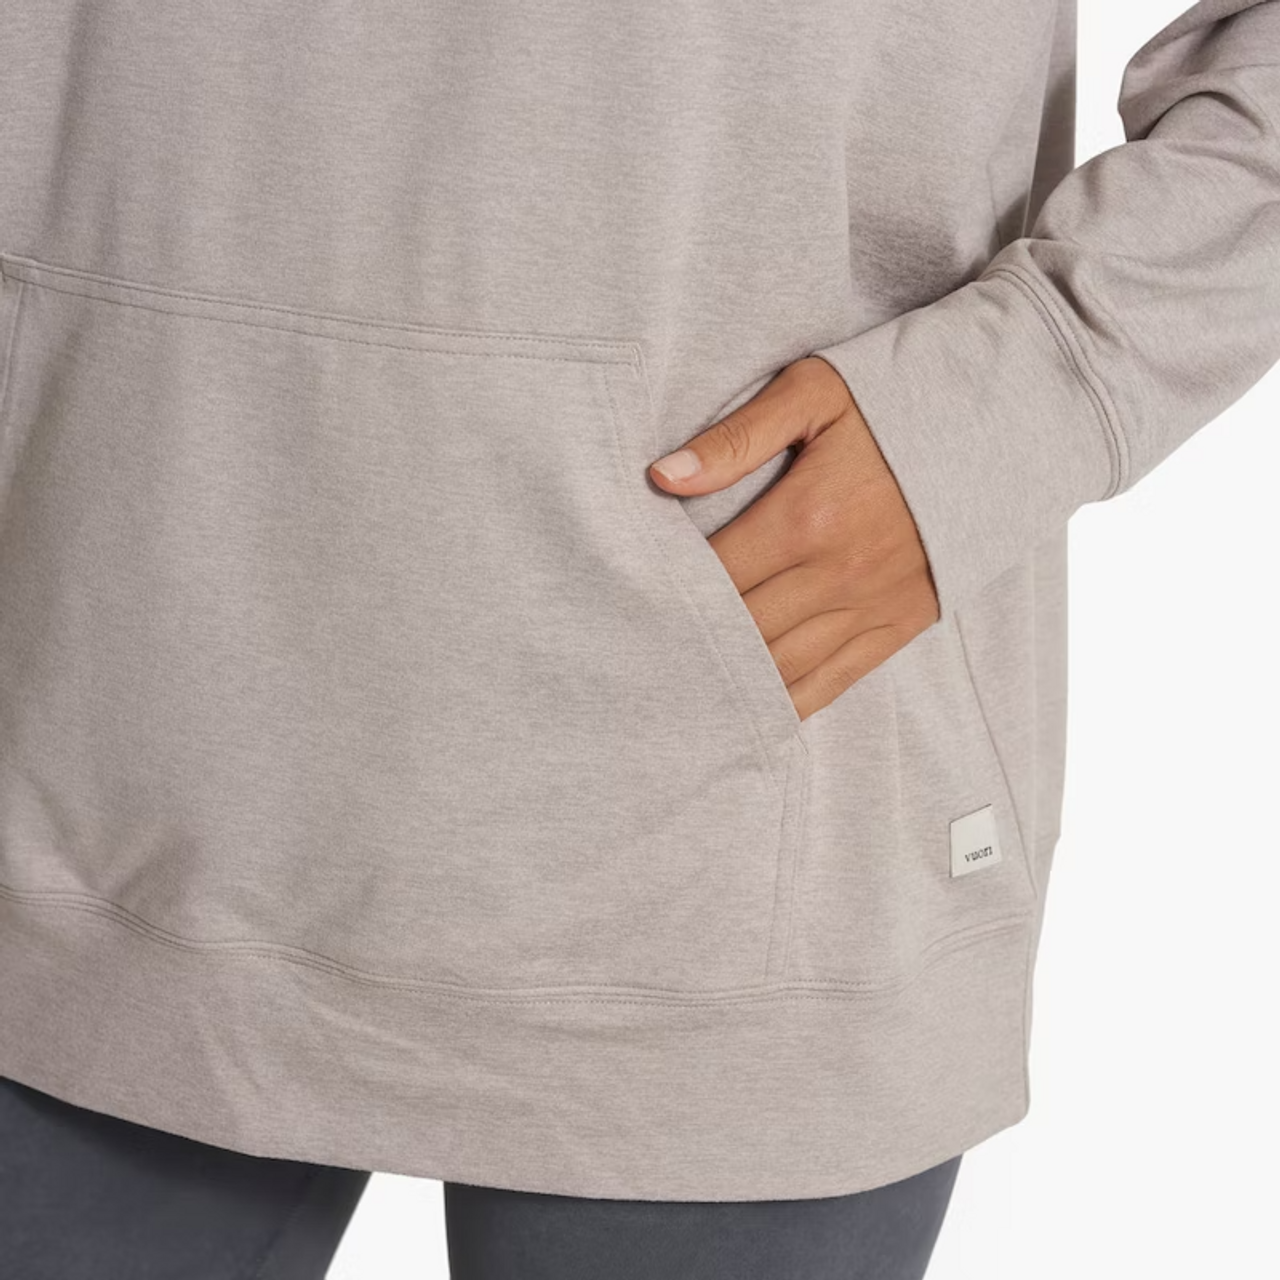 W Halo Oversized Hoodie - Northland - Mountain Boutique Shop